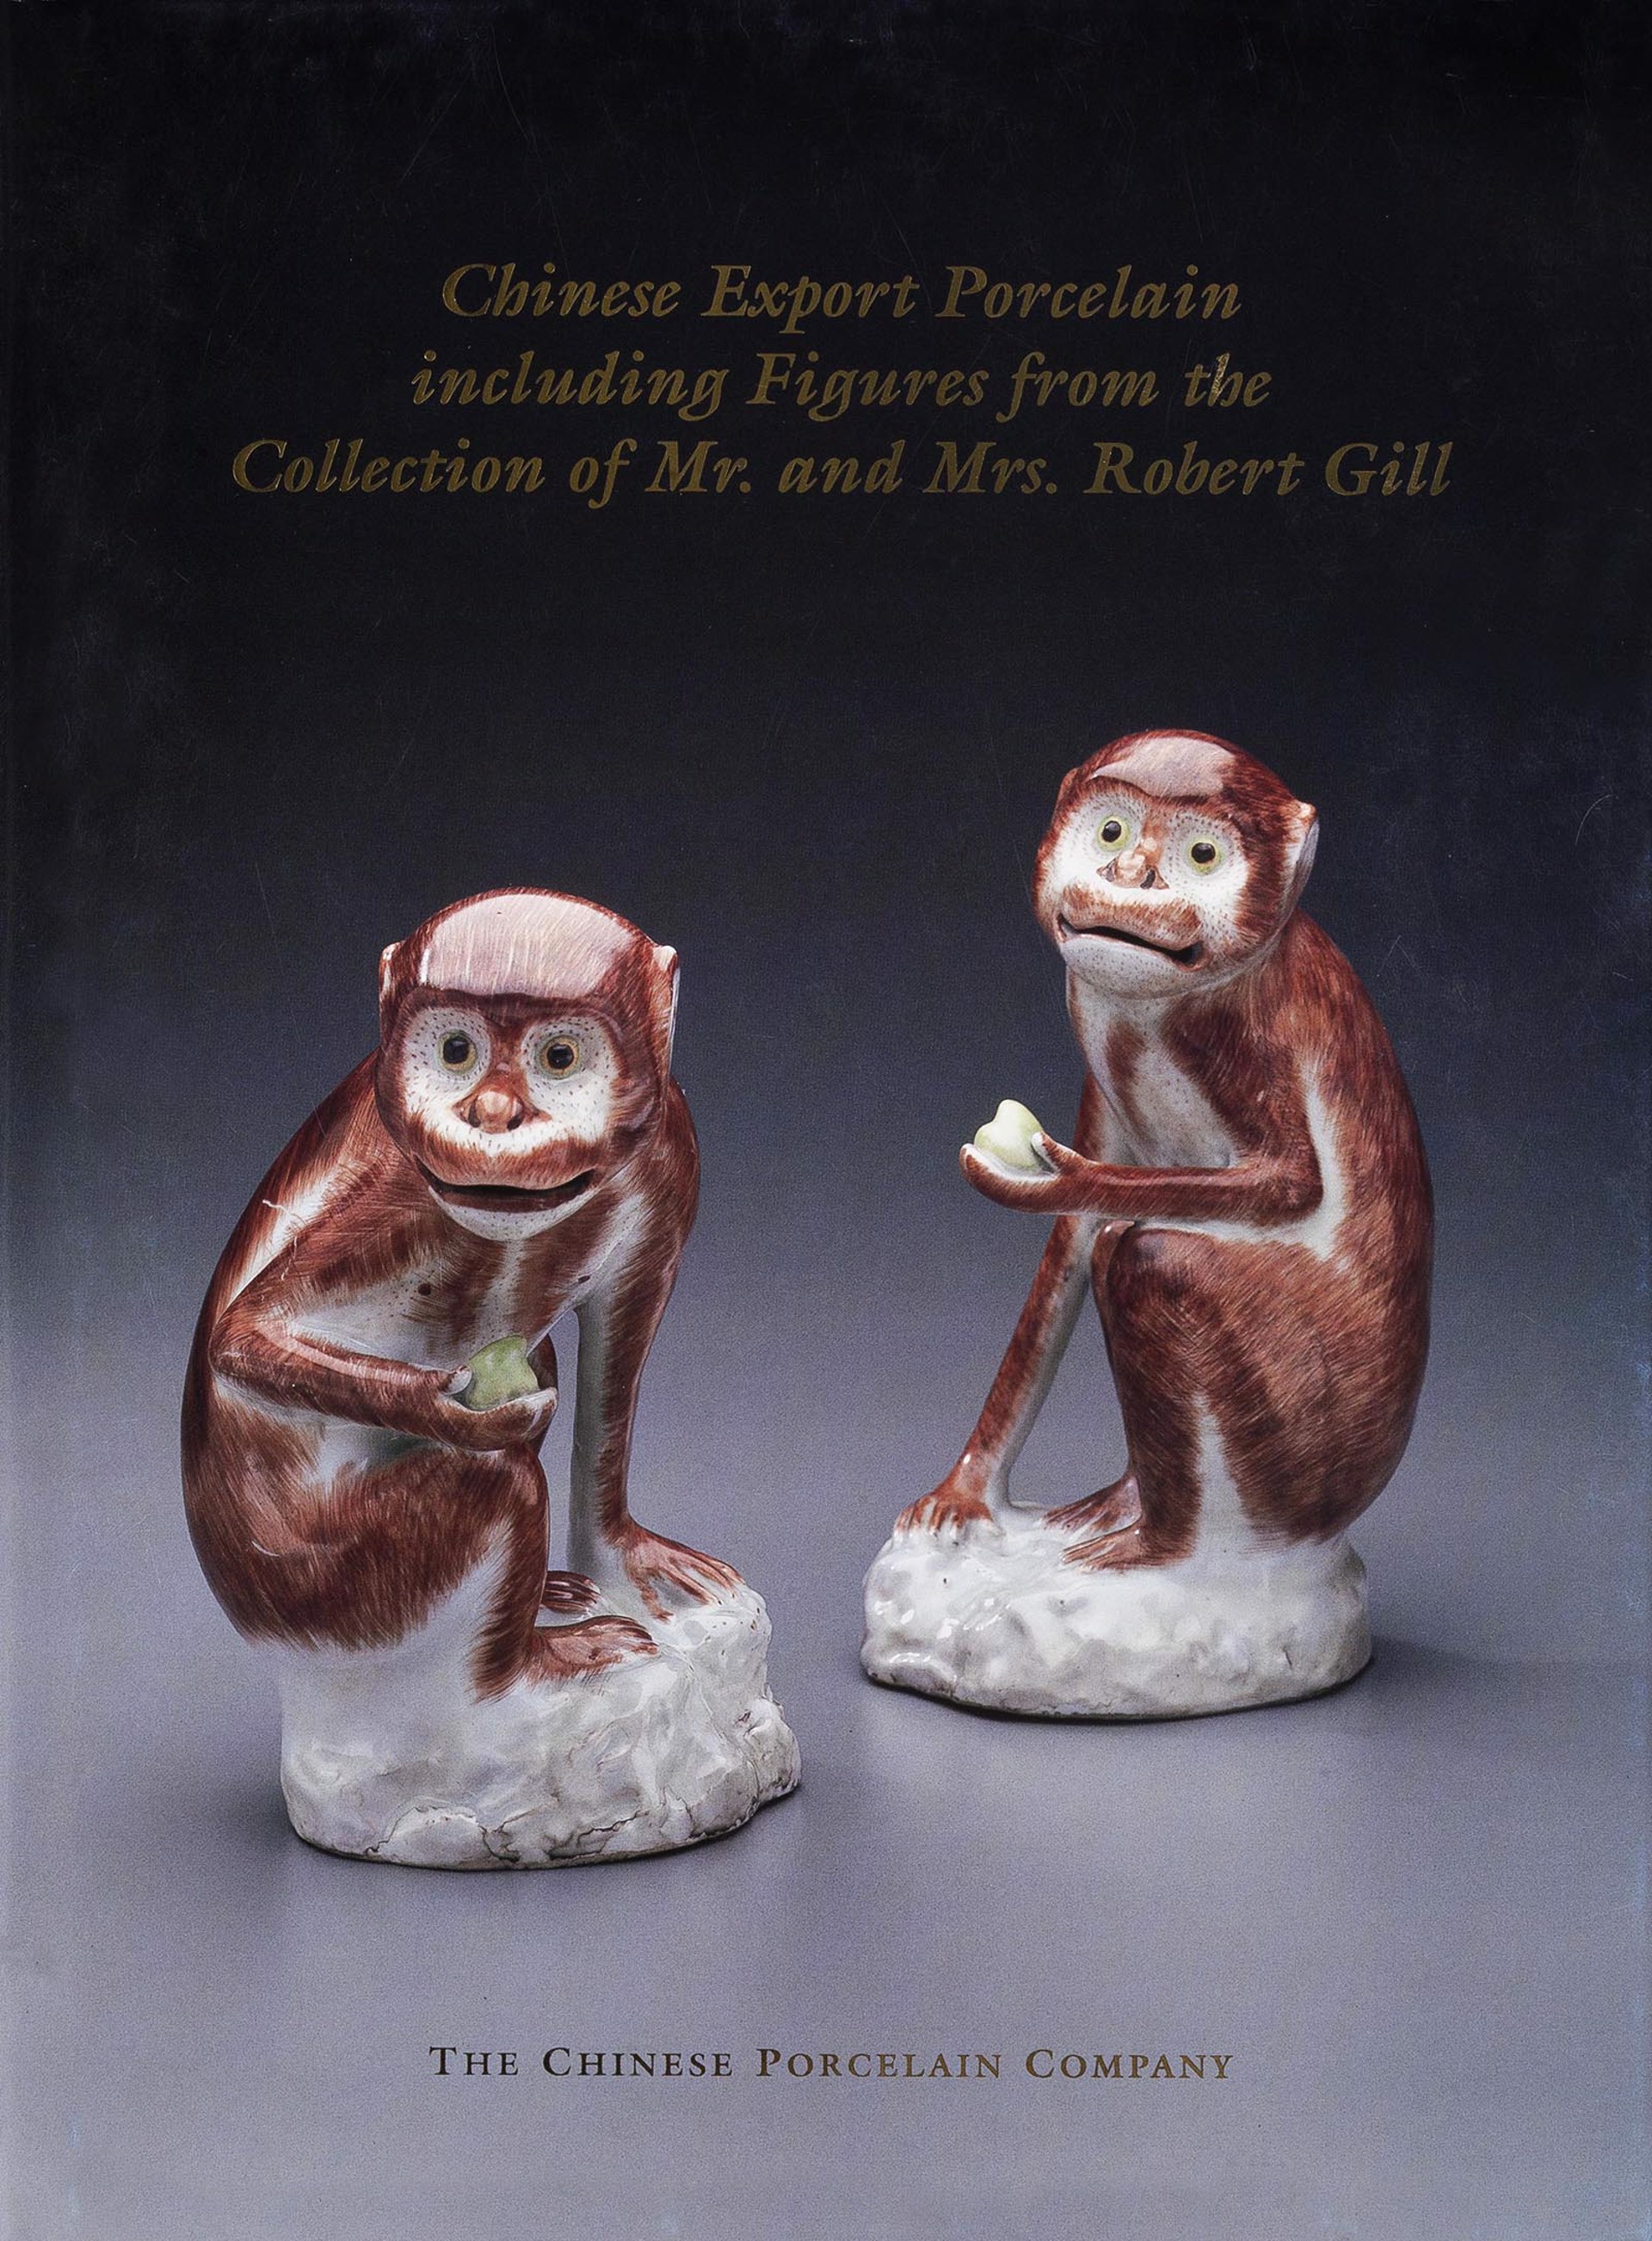 Chinese Export Porcelain including Figures from the Collection of Mr. & Mrs. Robert Gill by Catalog 39